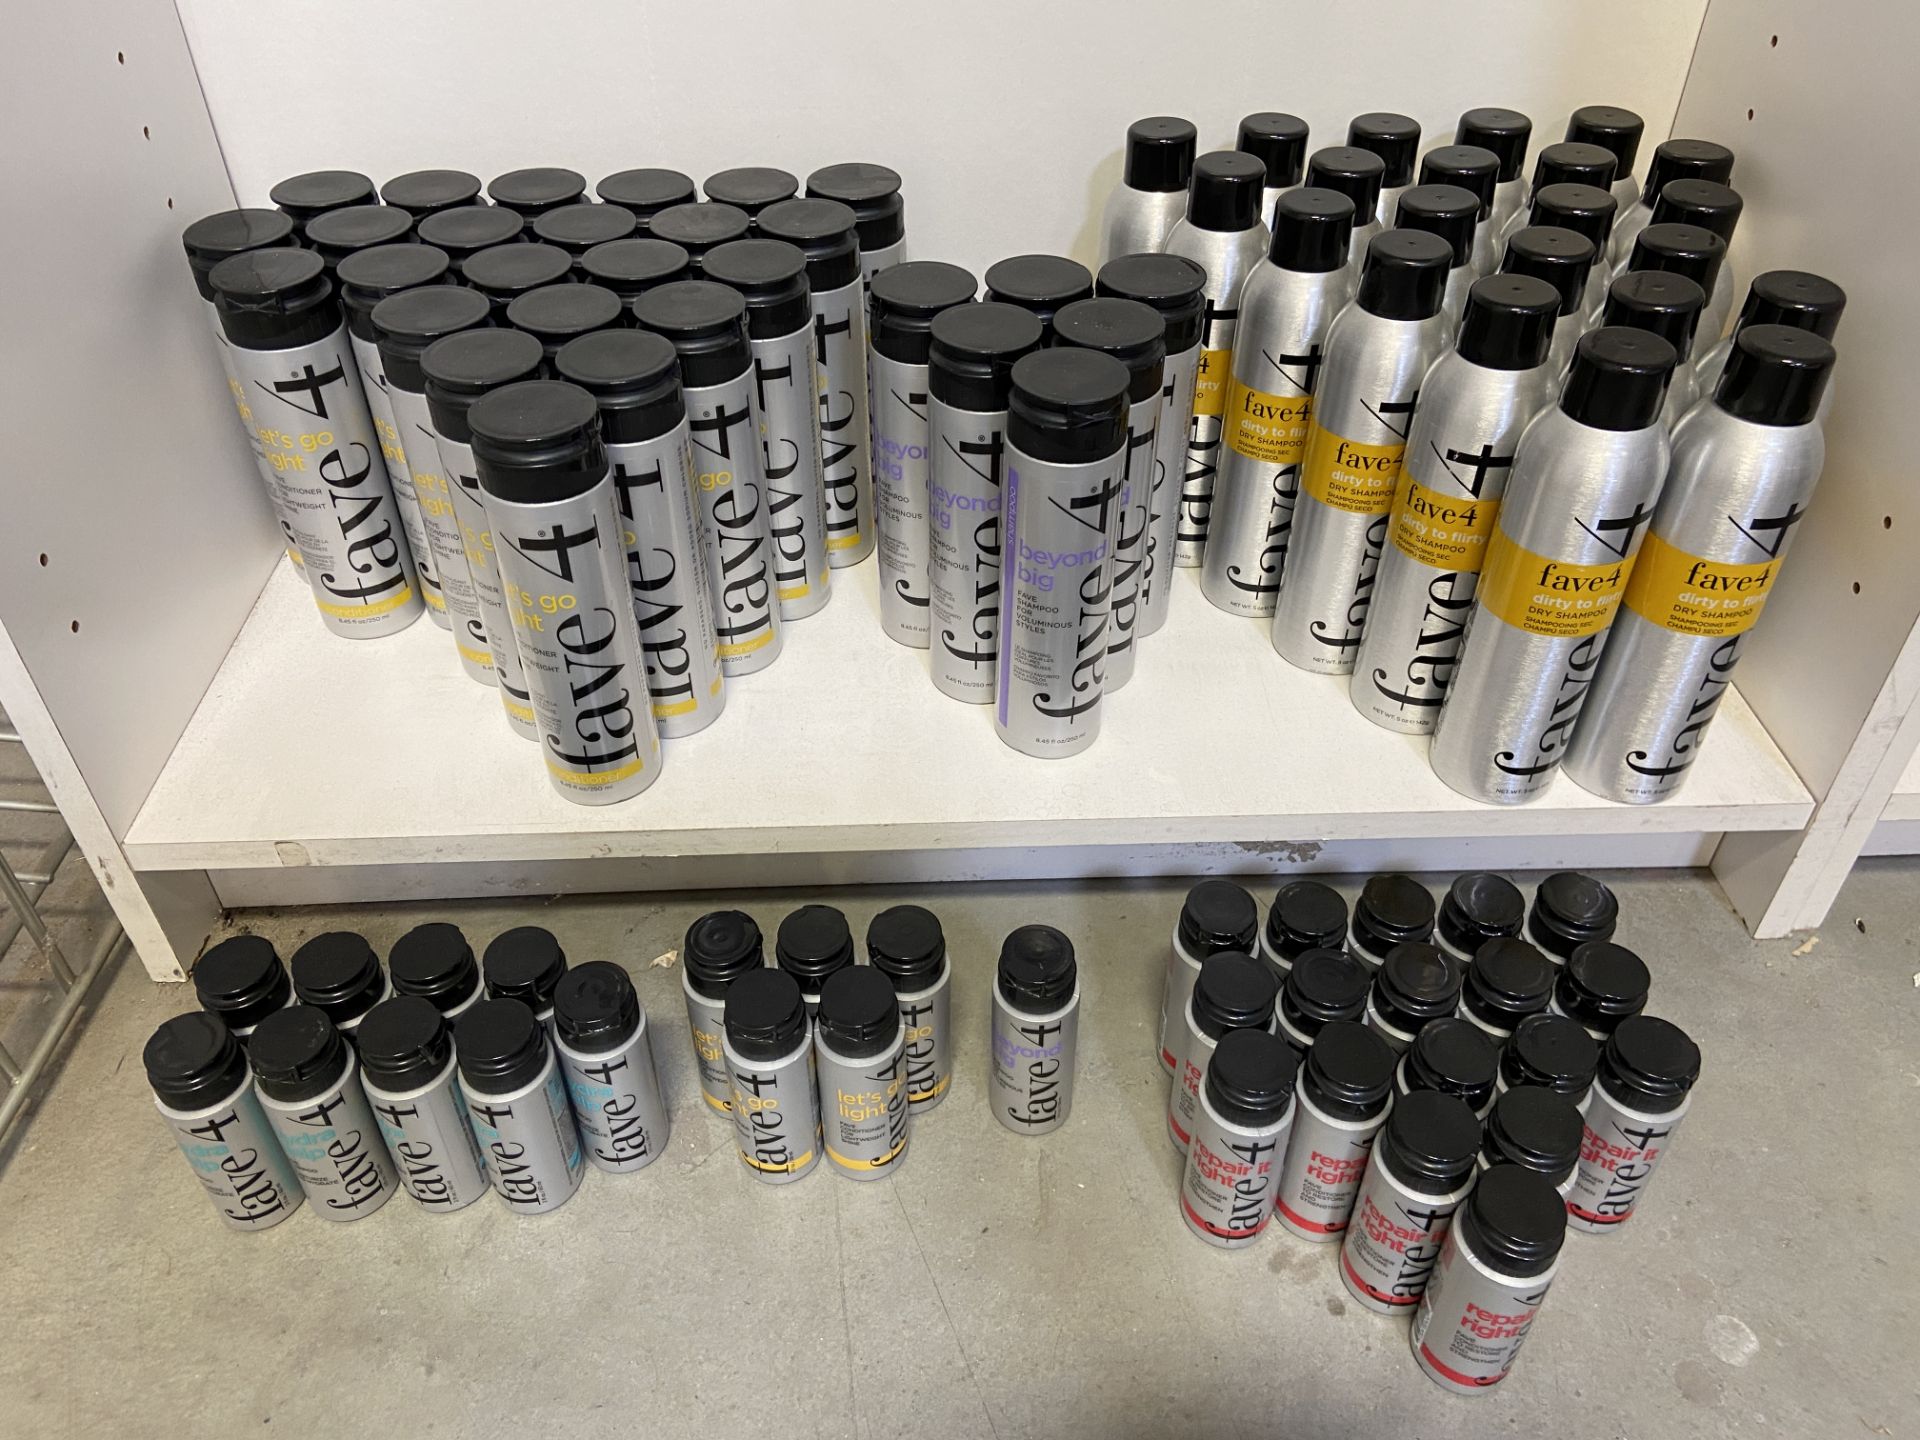 84 Bottles of Fave 4 Professional Beauty Salon Haircare Product (Over $1050 Retail Value!)